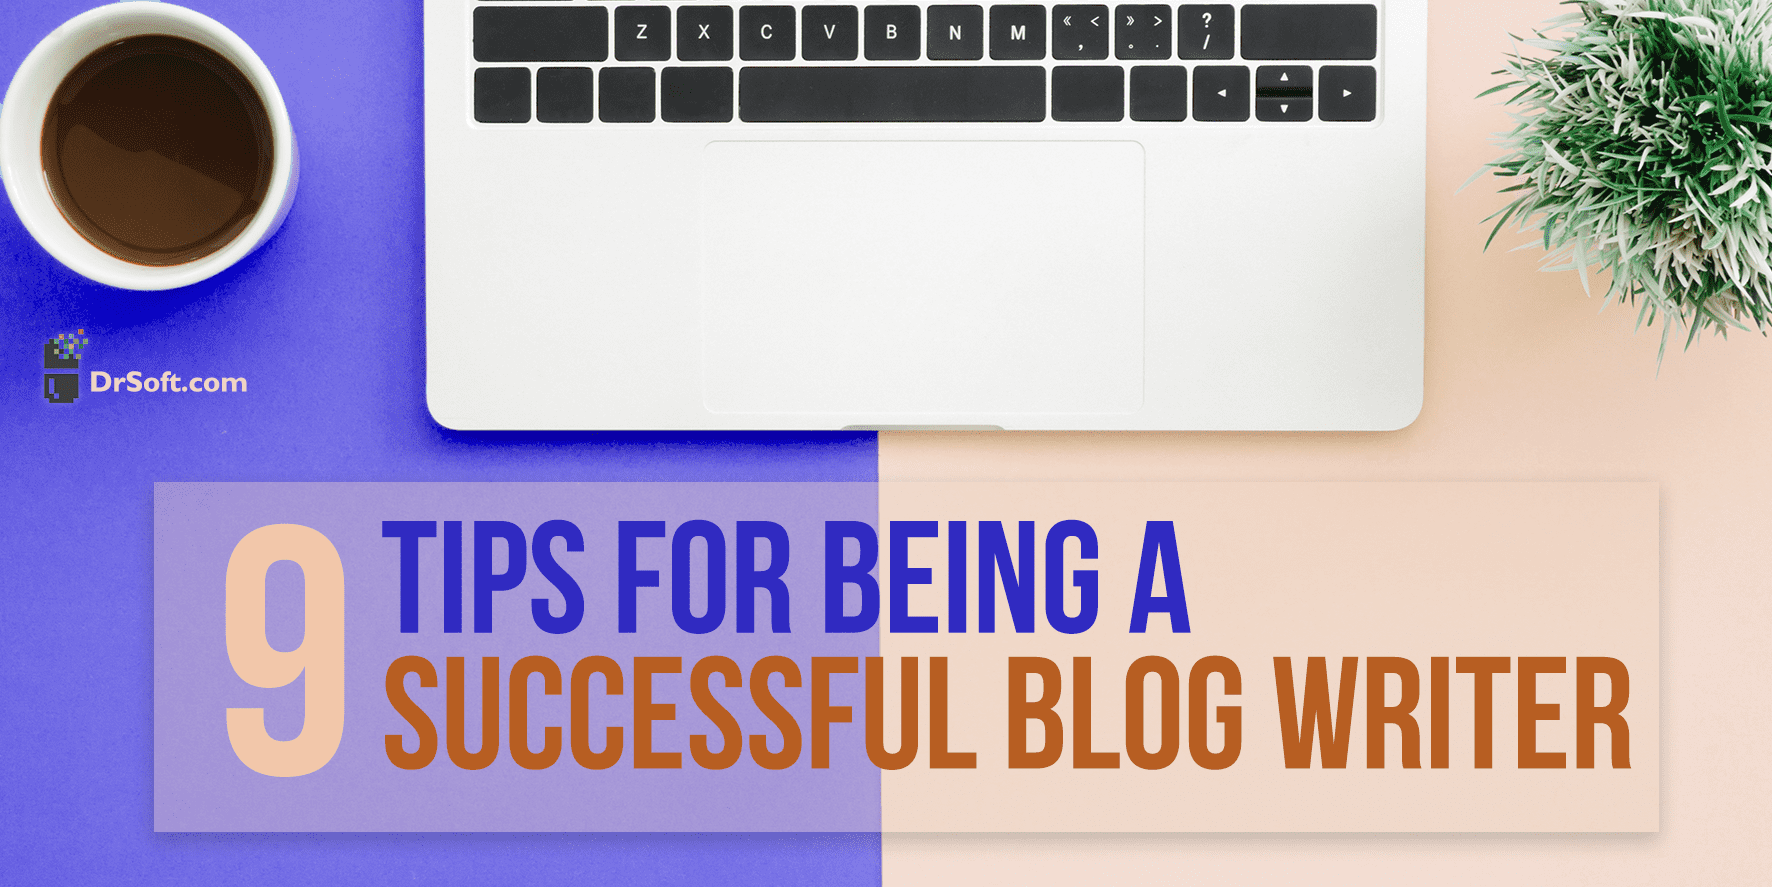 9 Tips for Being a Successful Blog Writer